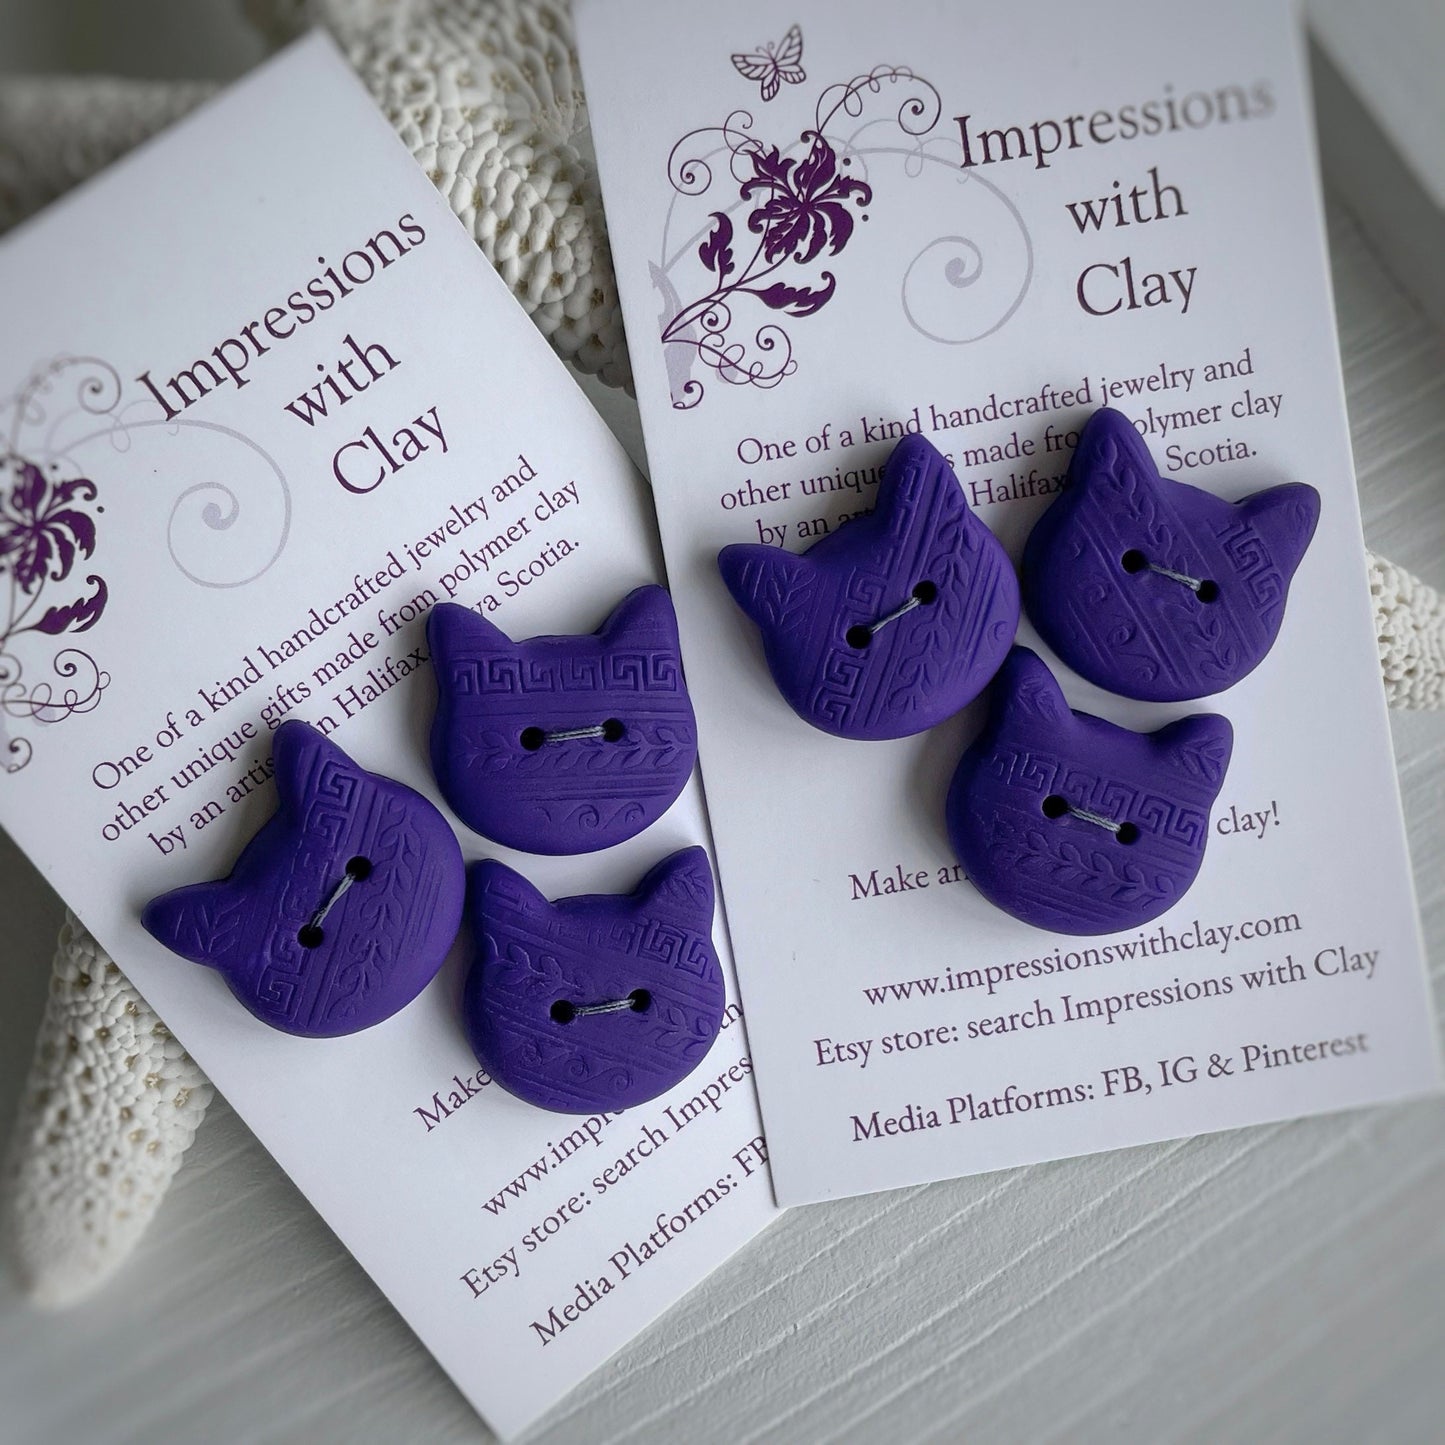 Purple Quality Cat Buttons | with Impression | Double layer Polymer Clay Buttons - set of 3 - ~18mm